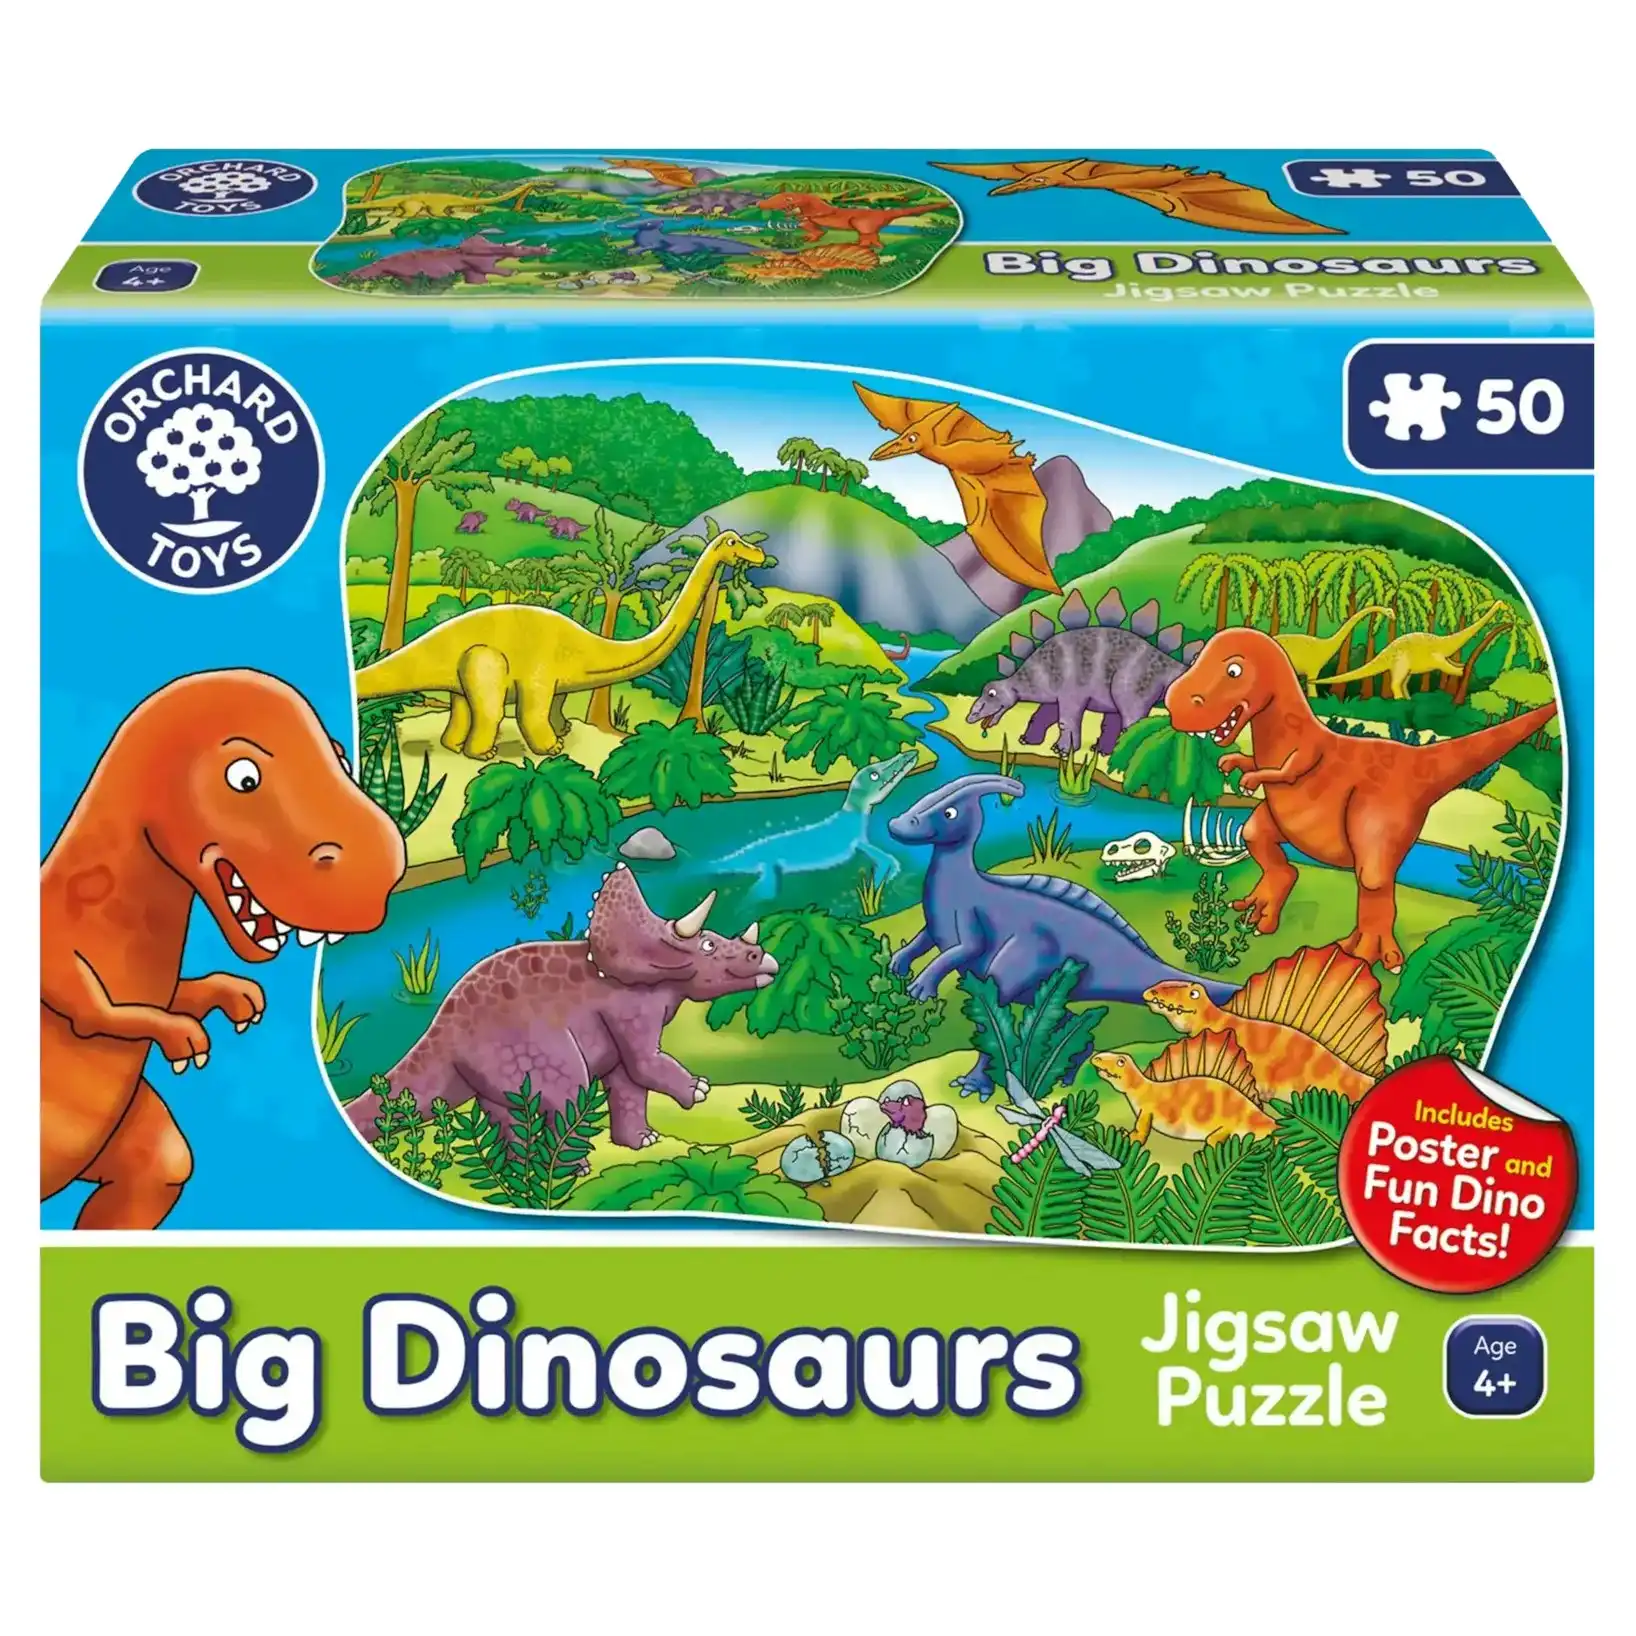 Orchard Toys - Big Dinosaurs Jigsaw Puzzle 50 Pieces